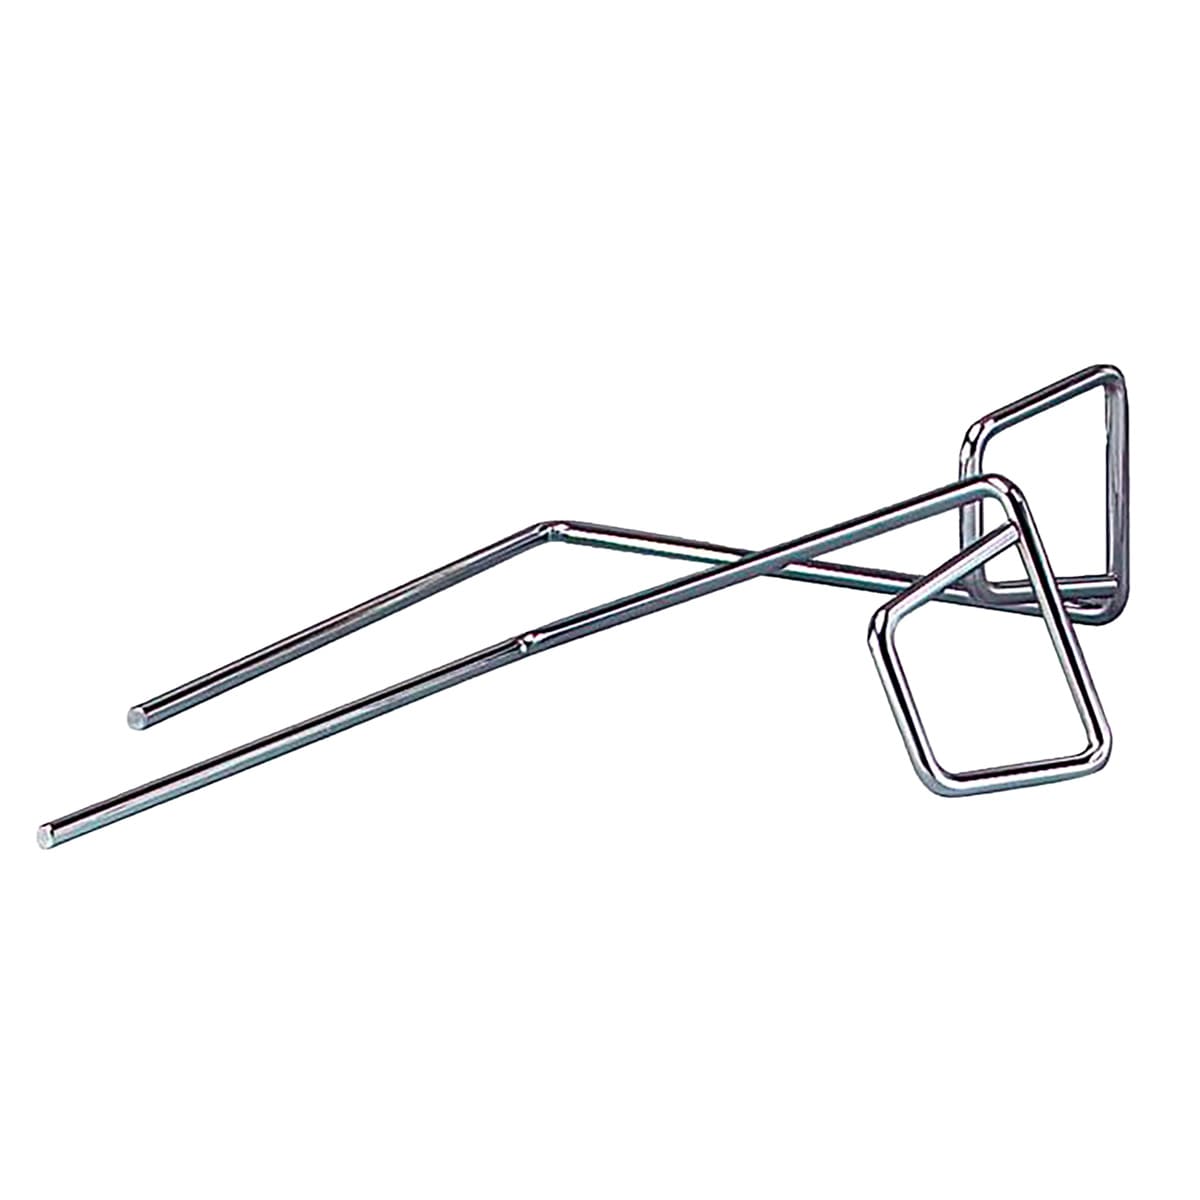 Pair of stainless steel stirrups diam. 14mm, without clamp